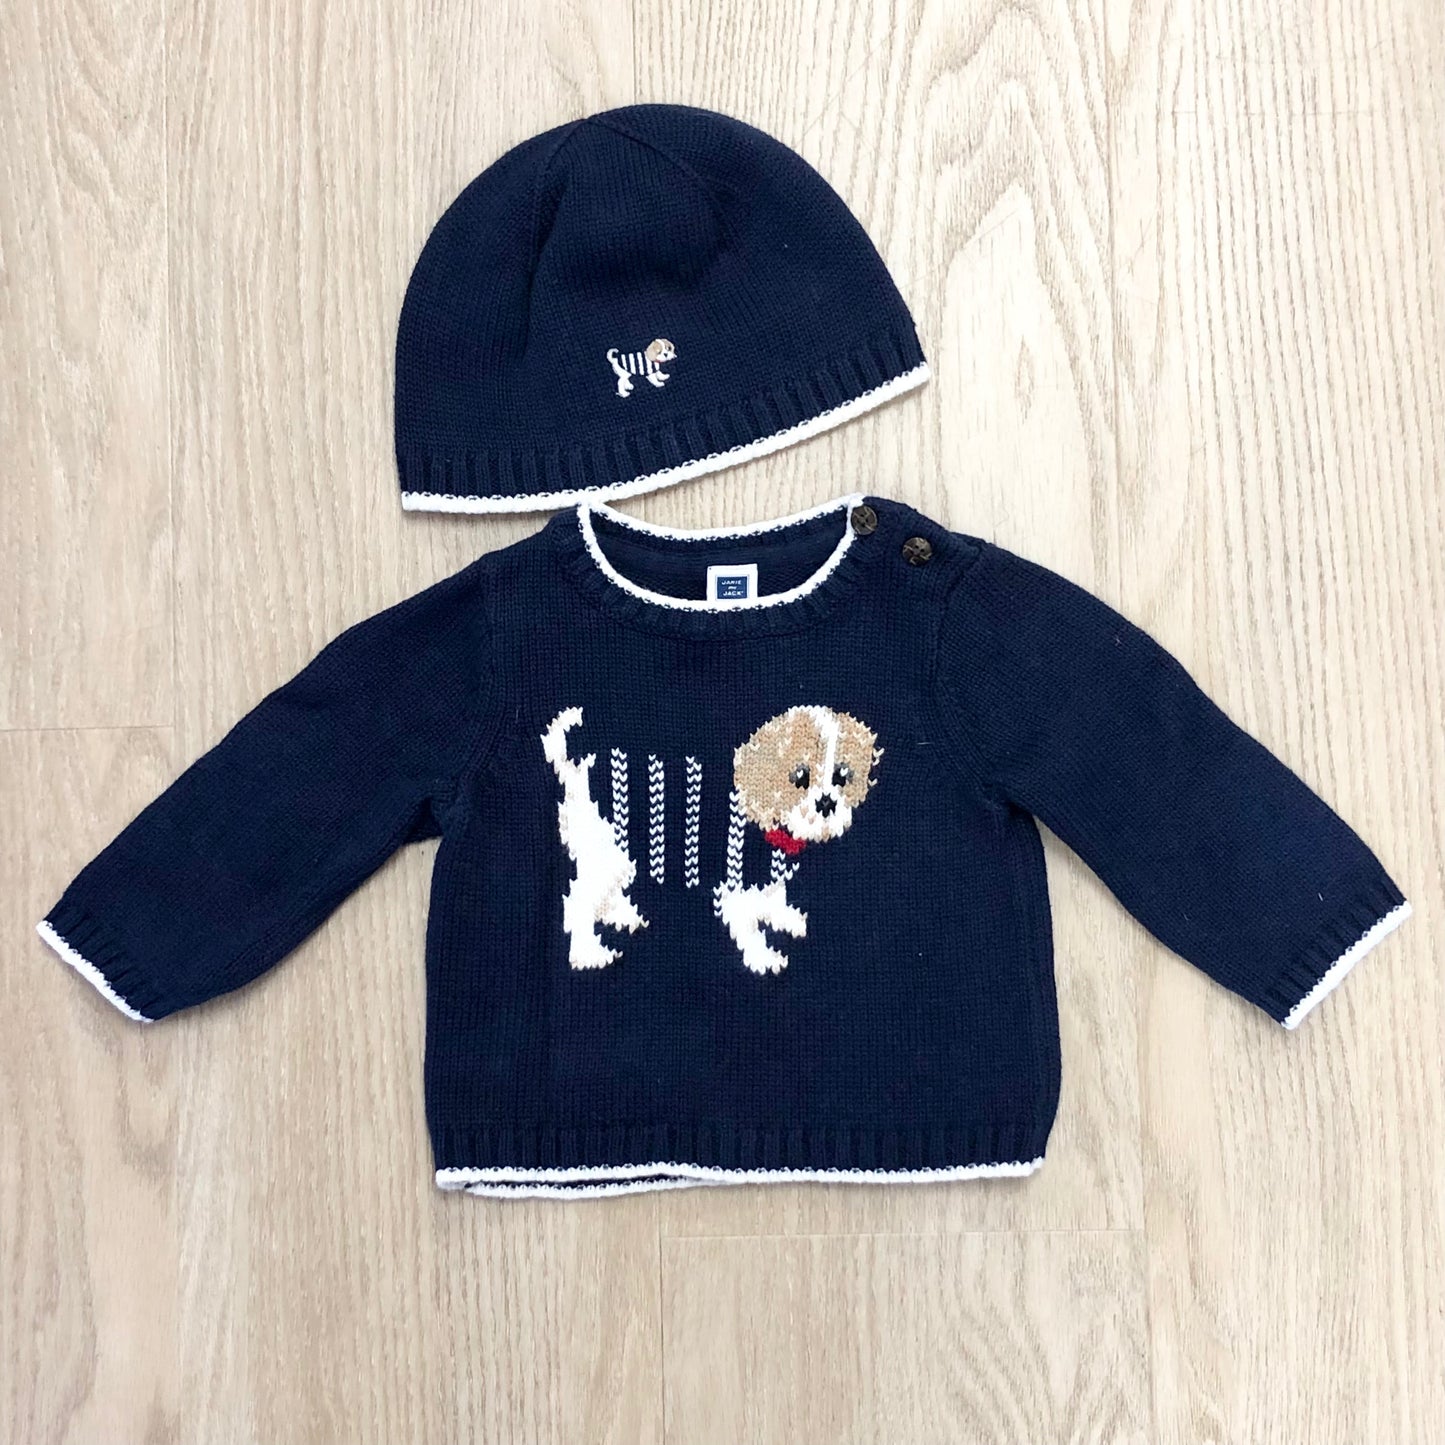 Janie and Jack Child Size 3 Months Navy Dog Sweater